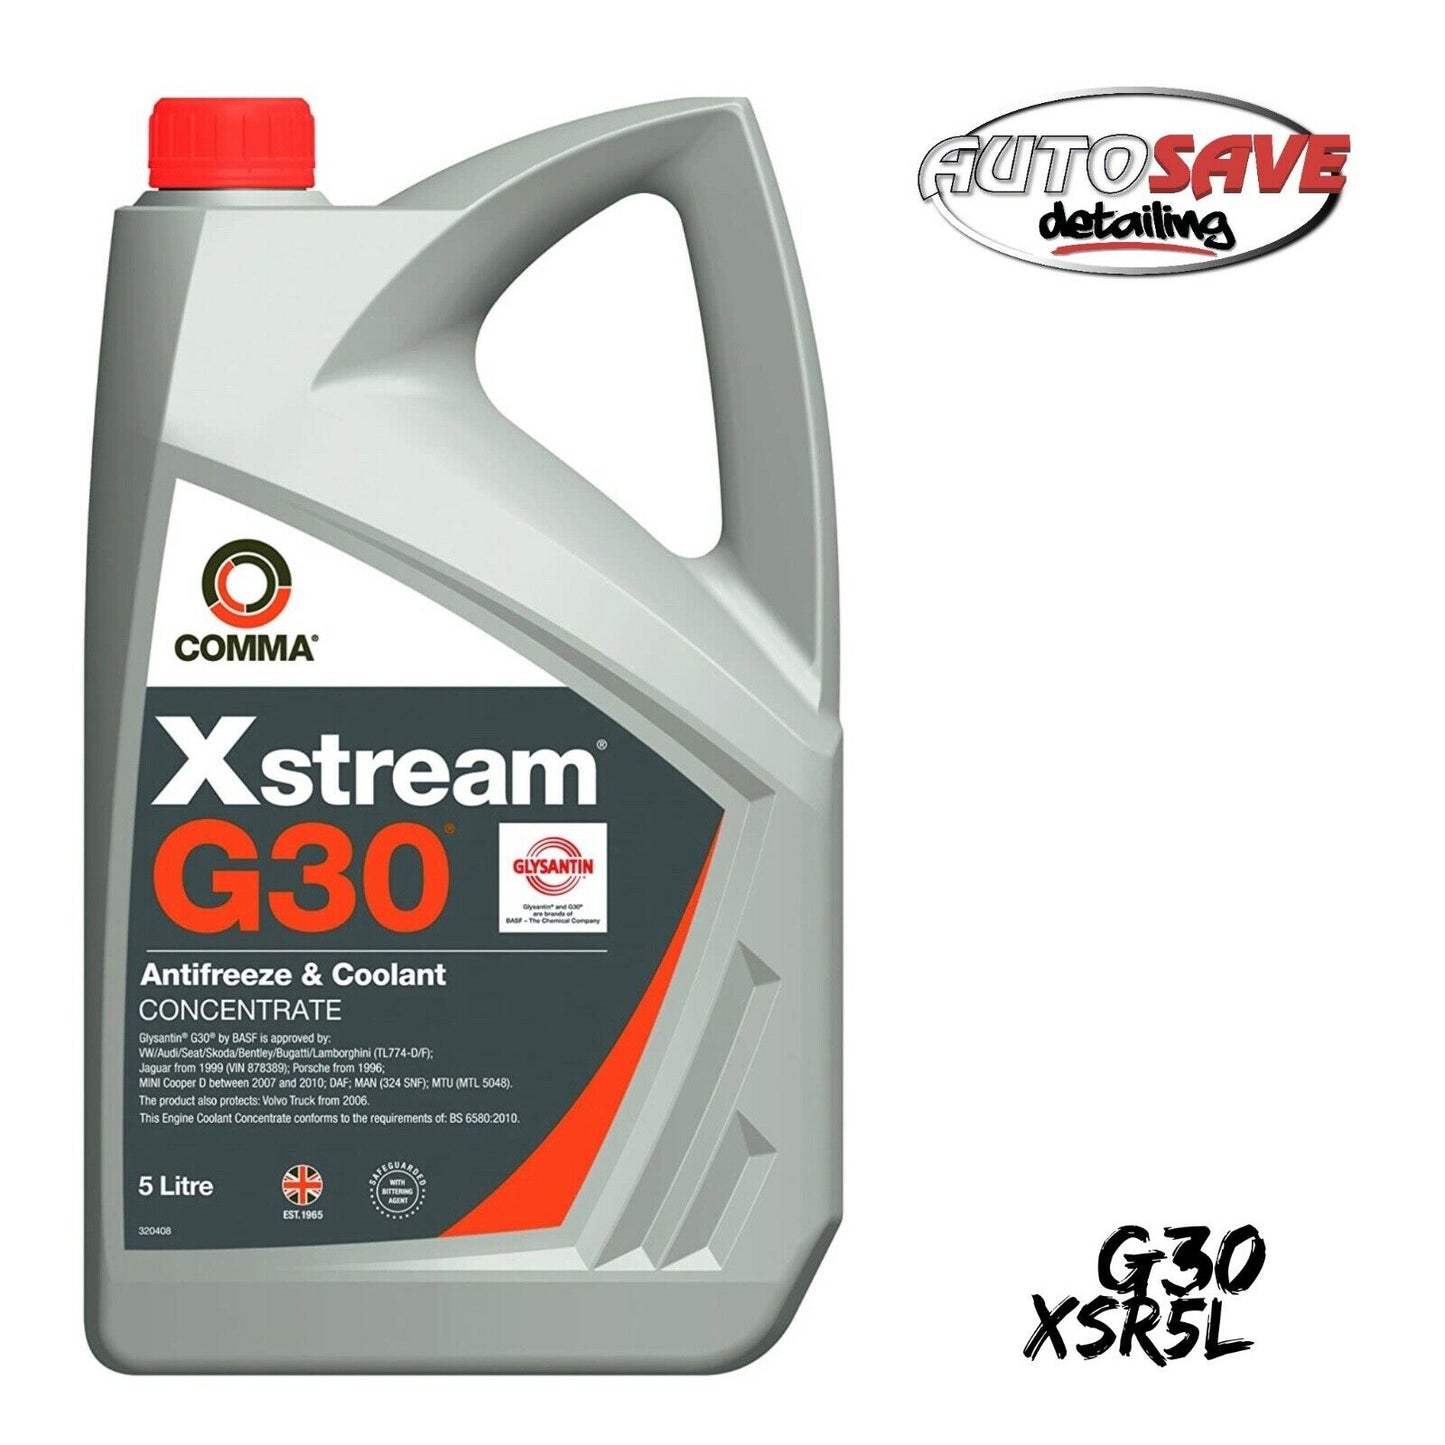 Comma - XSTREAM G30 OEM Approved Antifreeze & Coolant